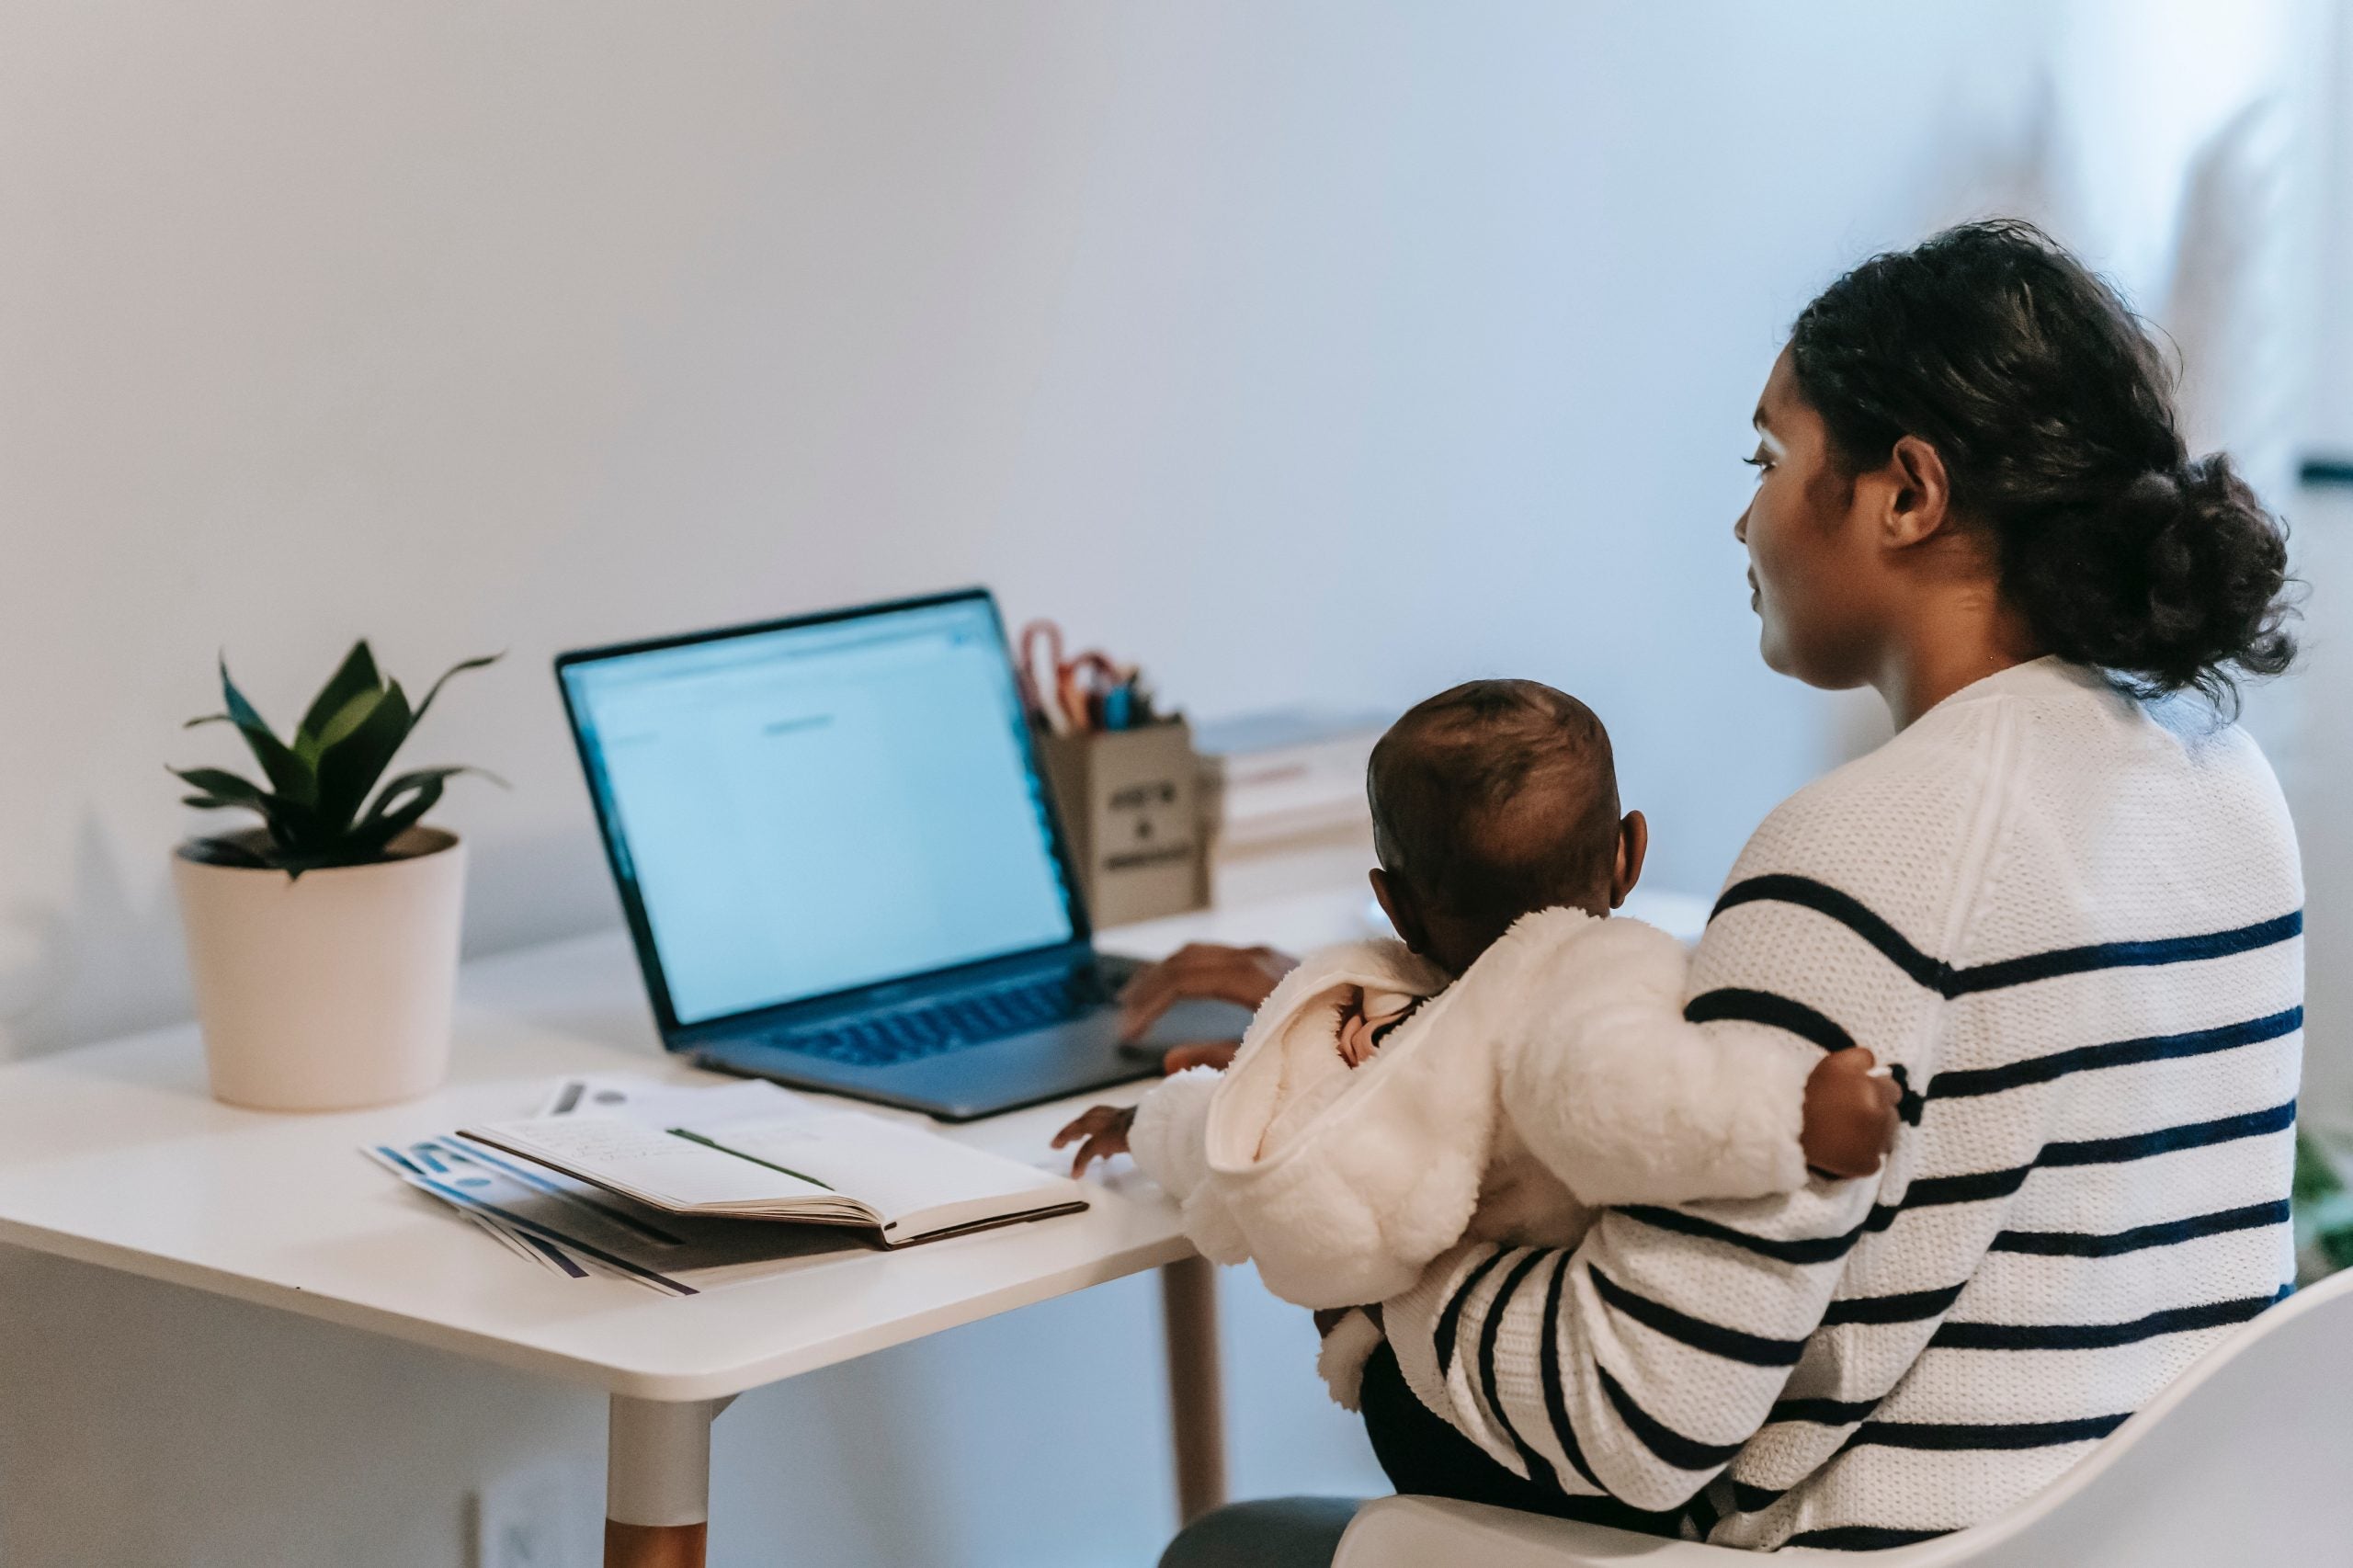 Report: Mothering While Working Makes Life Significantly Harder